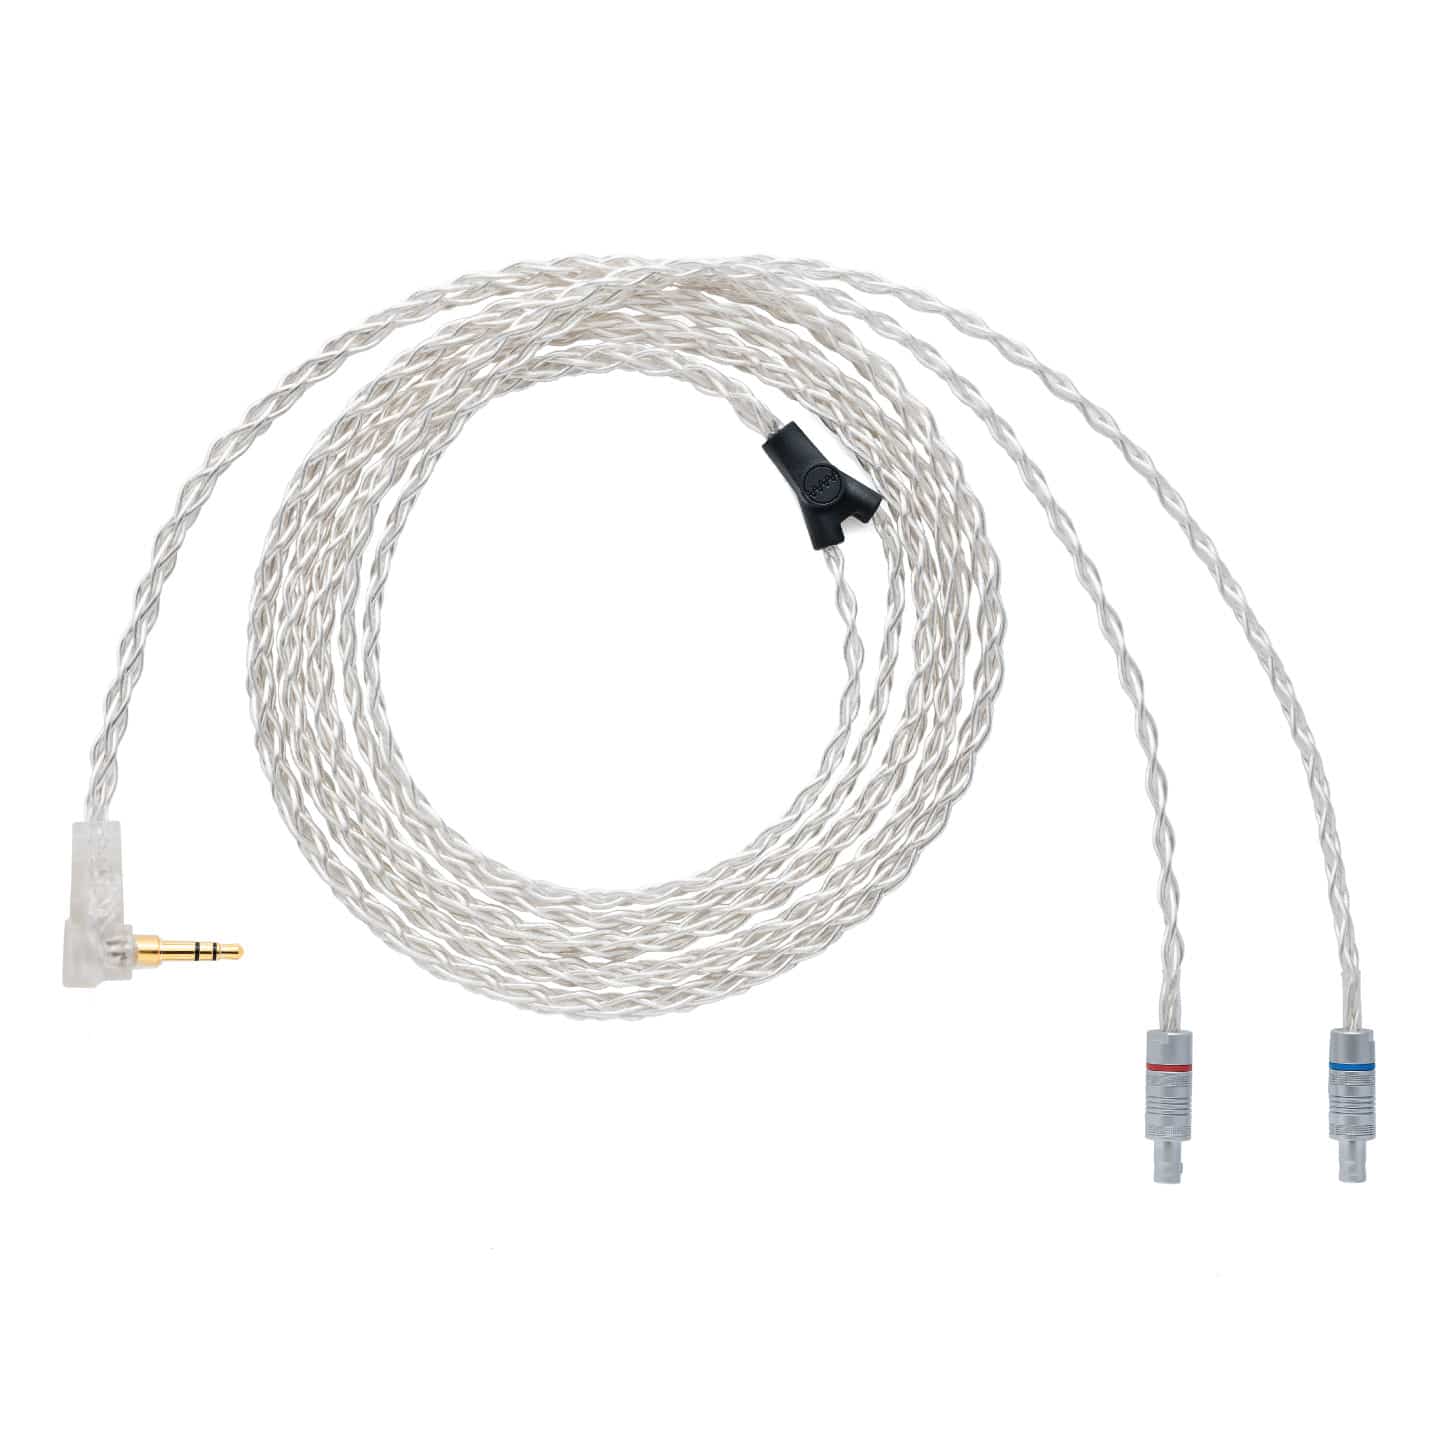 ALO audio Litz MMCX Replacement Cable for IEMs | Bloom Audio